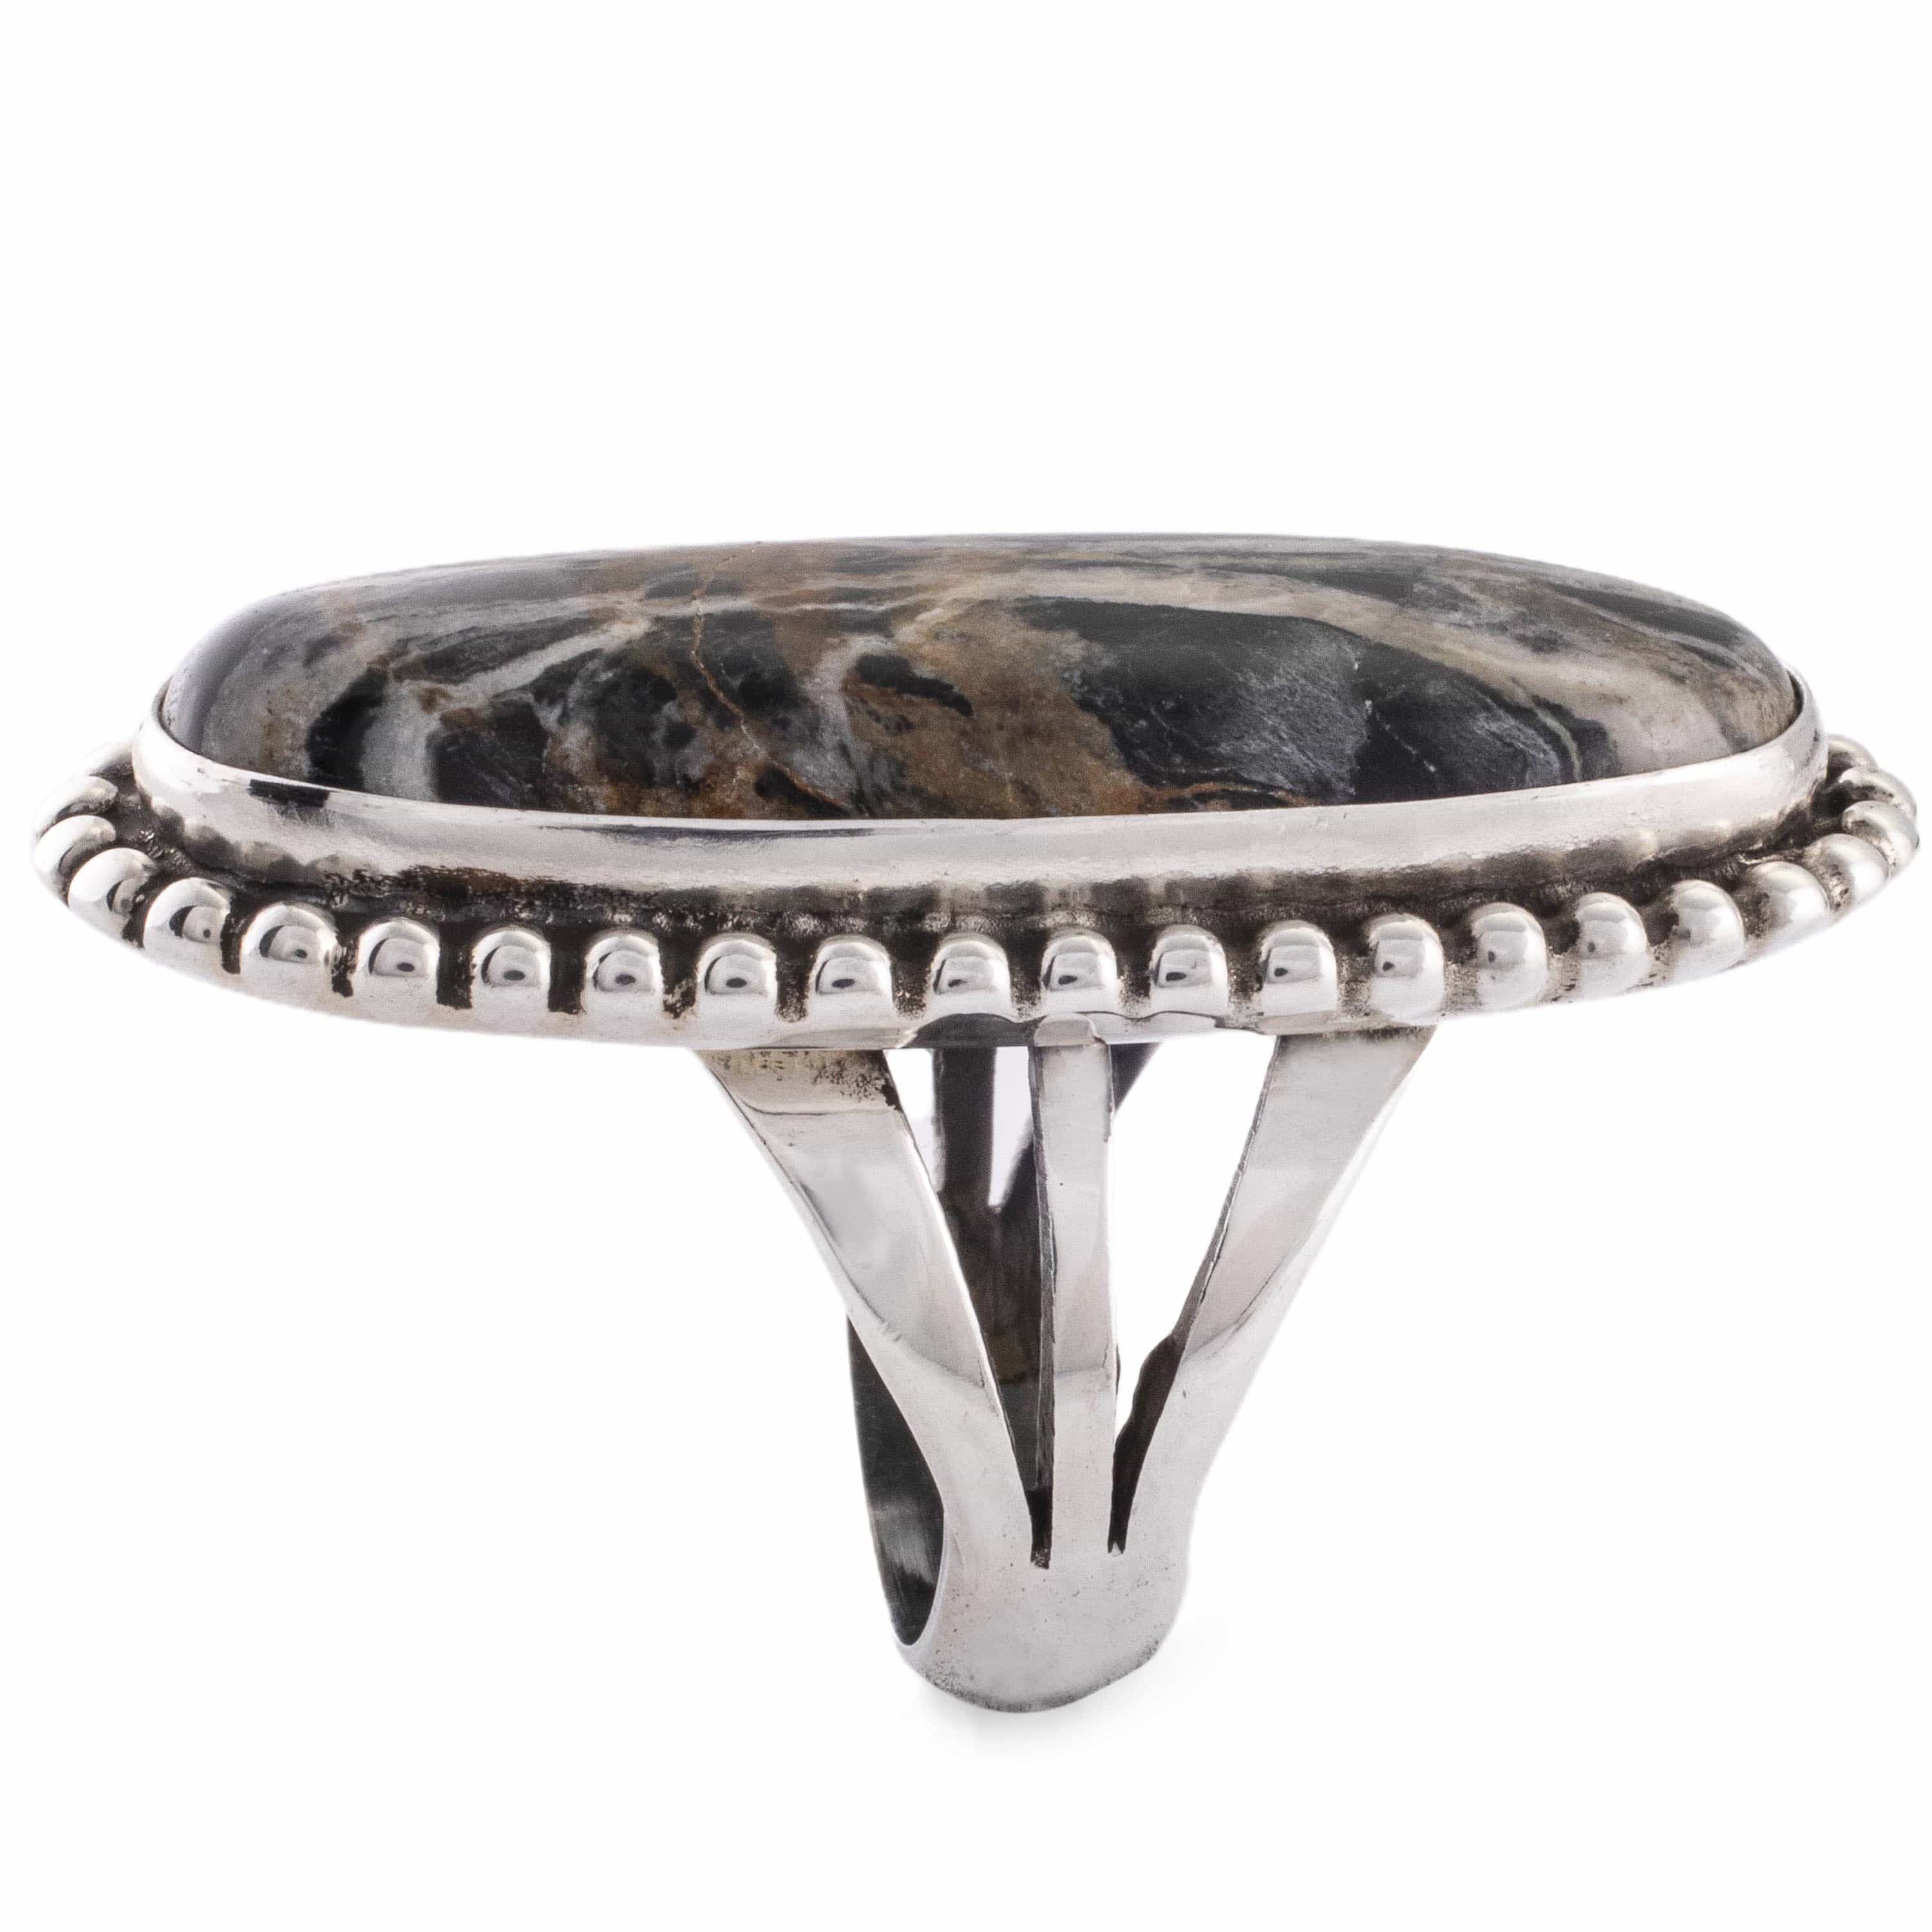 Kalifano Native American Jewelry 8 Eddie Secatero Navajo White Buffalo Turquoise USA Native American Made 925 Sterling Silver Ring NAR900.024.8